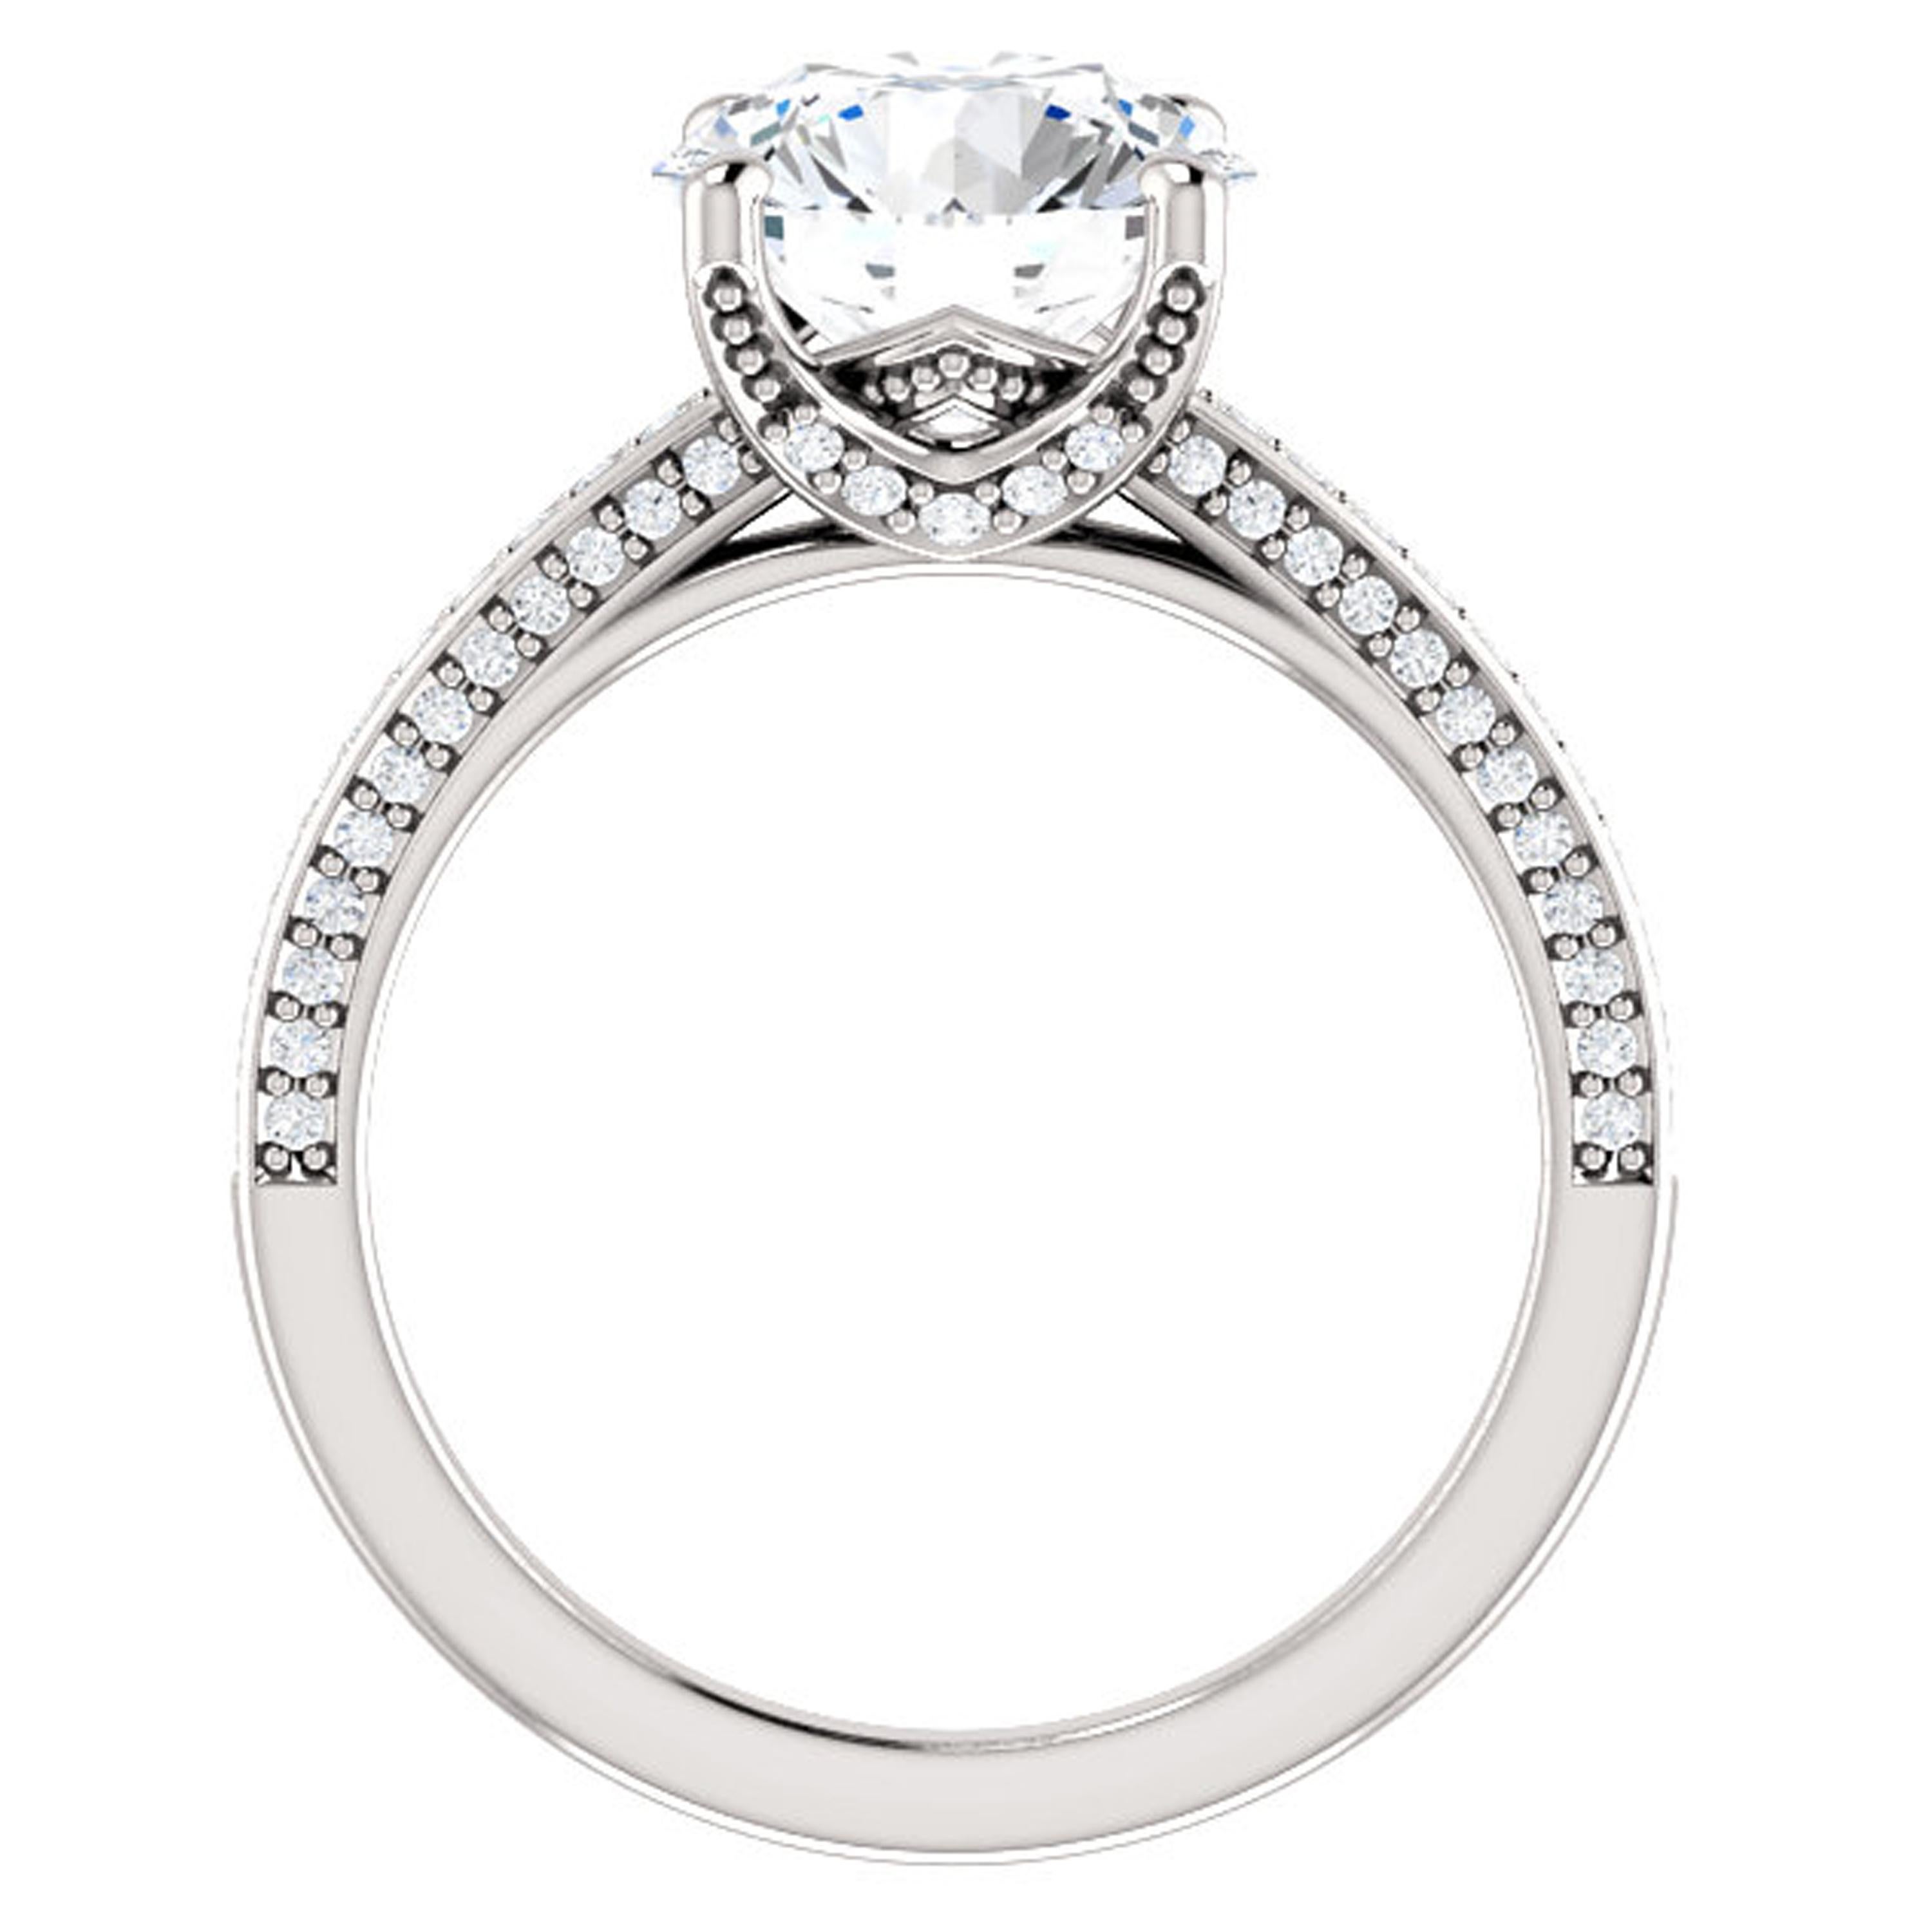 Glamorous diamonds full of life dance along the shank, claw and gallery of this breathtaking engagement ring. An eye-catching GIA certified diamond shines gloriously in the center. Valorenna's high-polish creates luxurious appeal.

Matching band